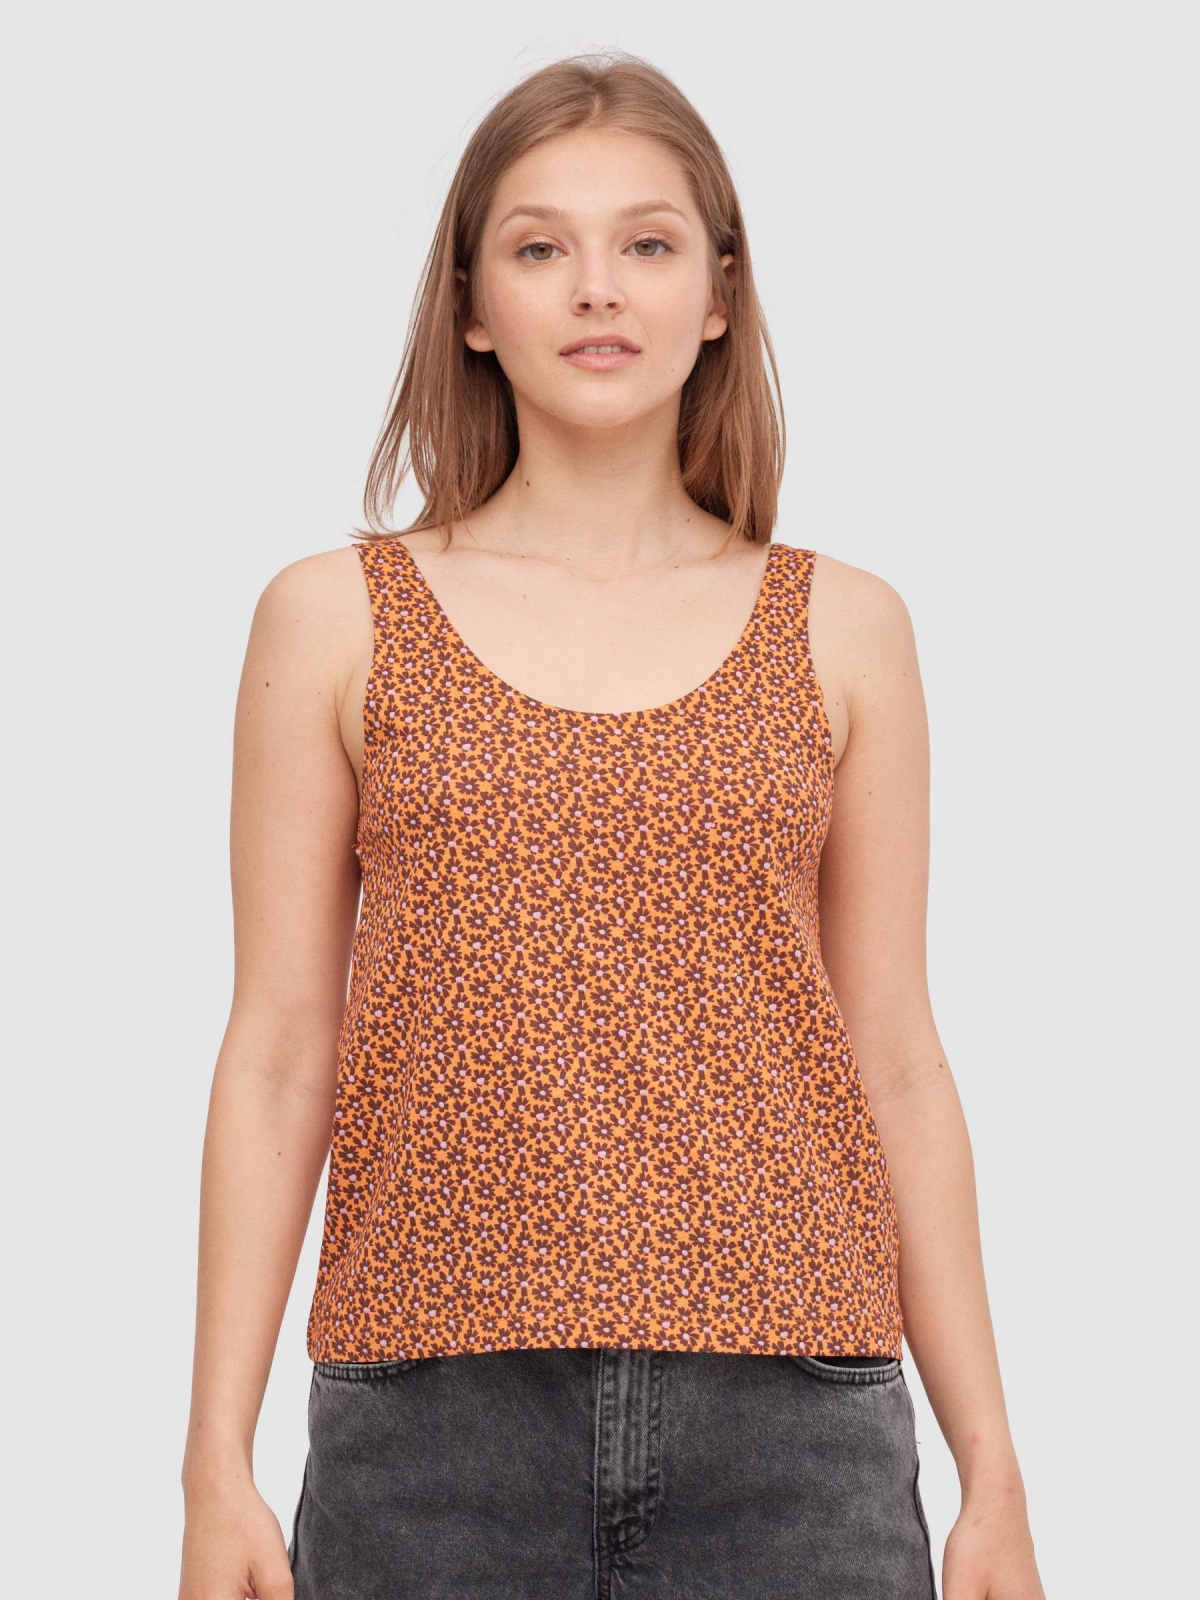 Floral tank top salmon middle front view